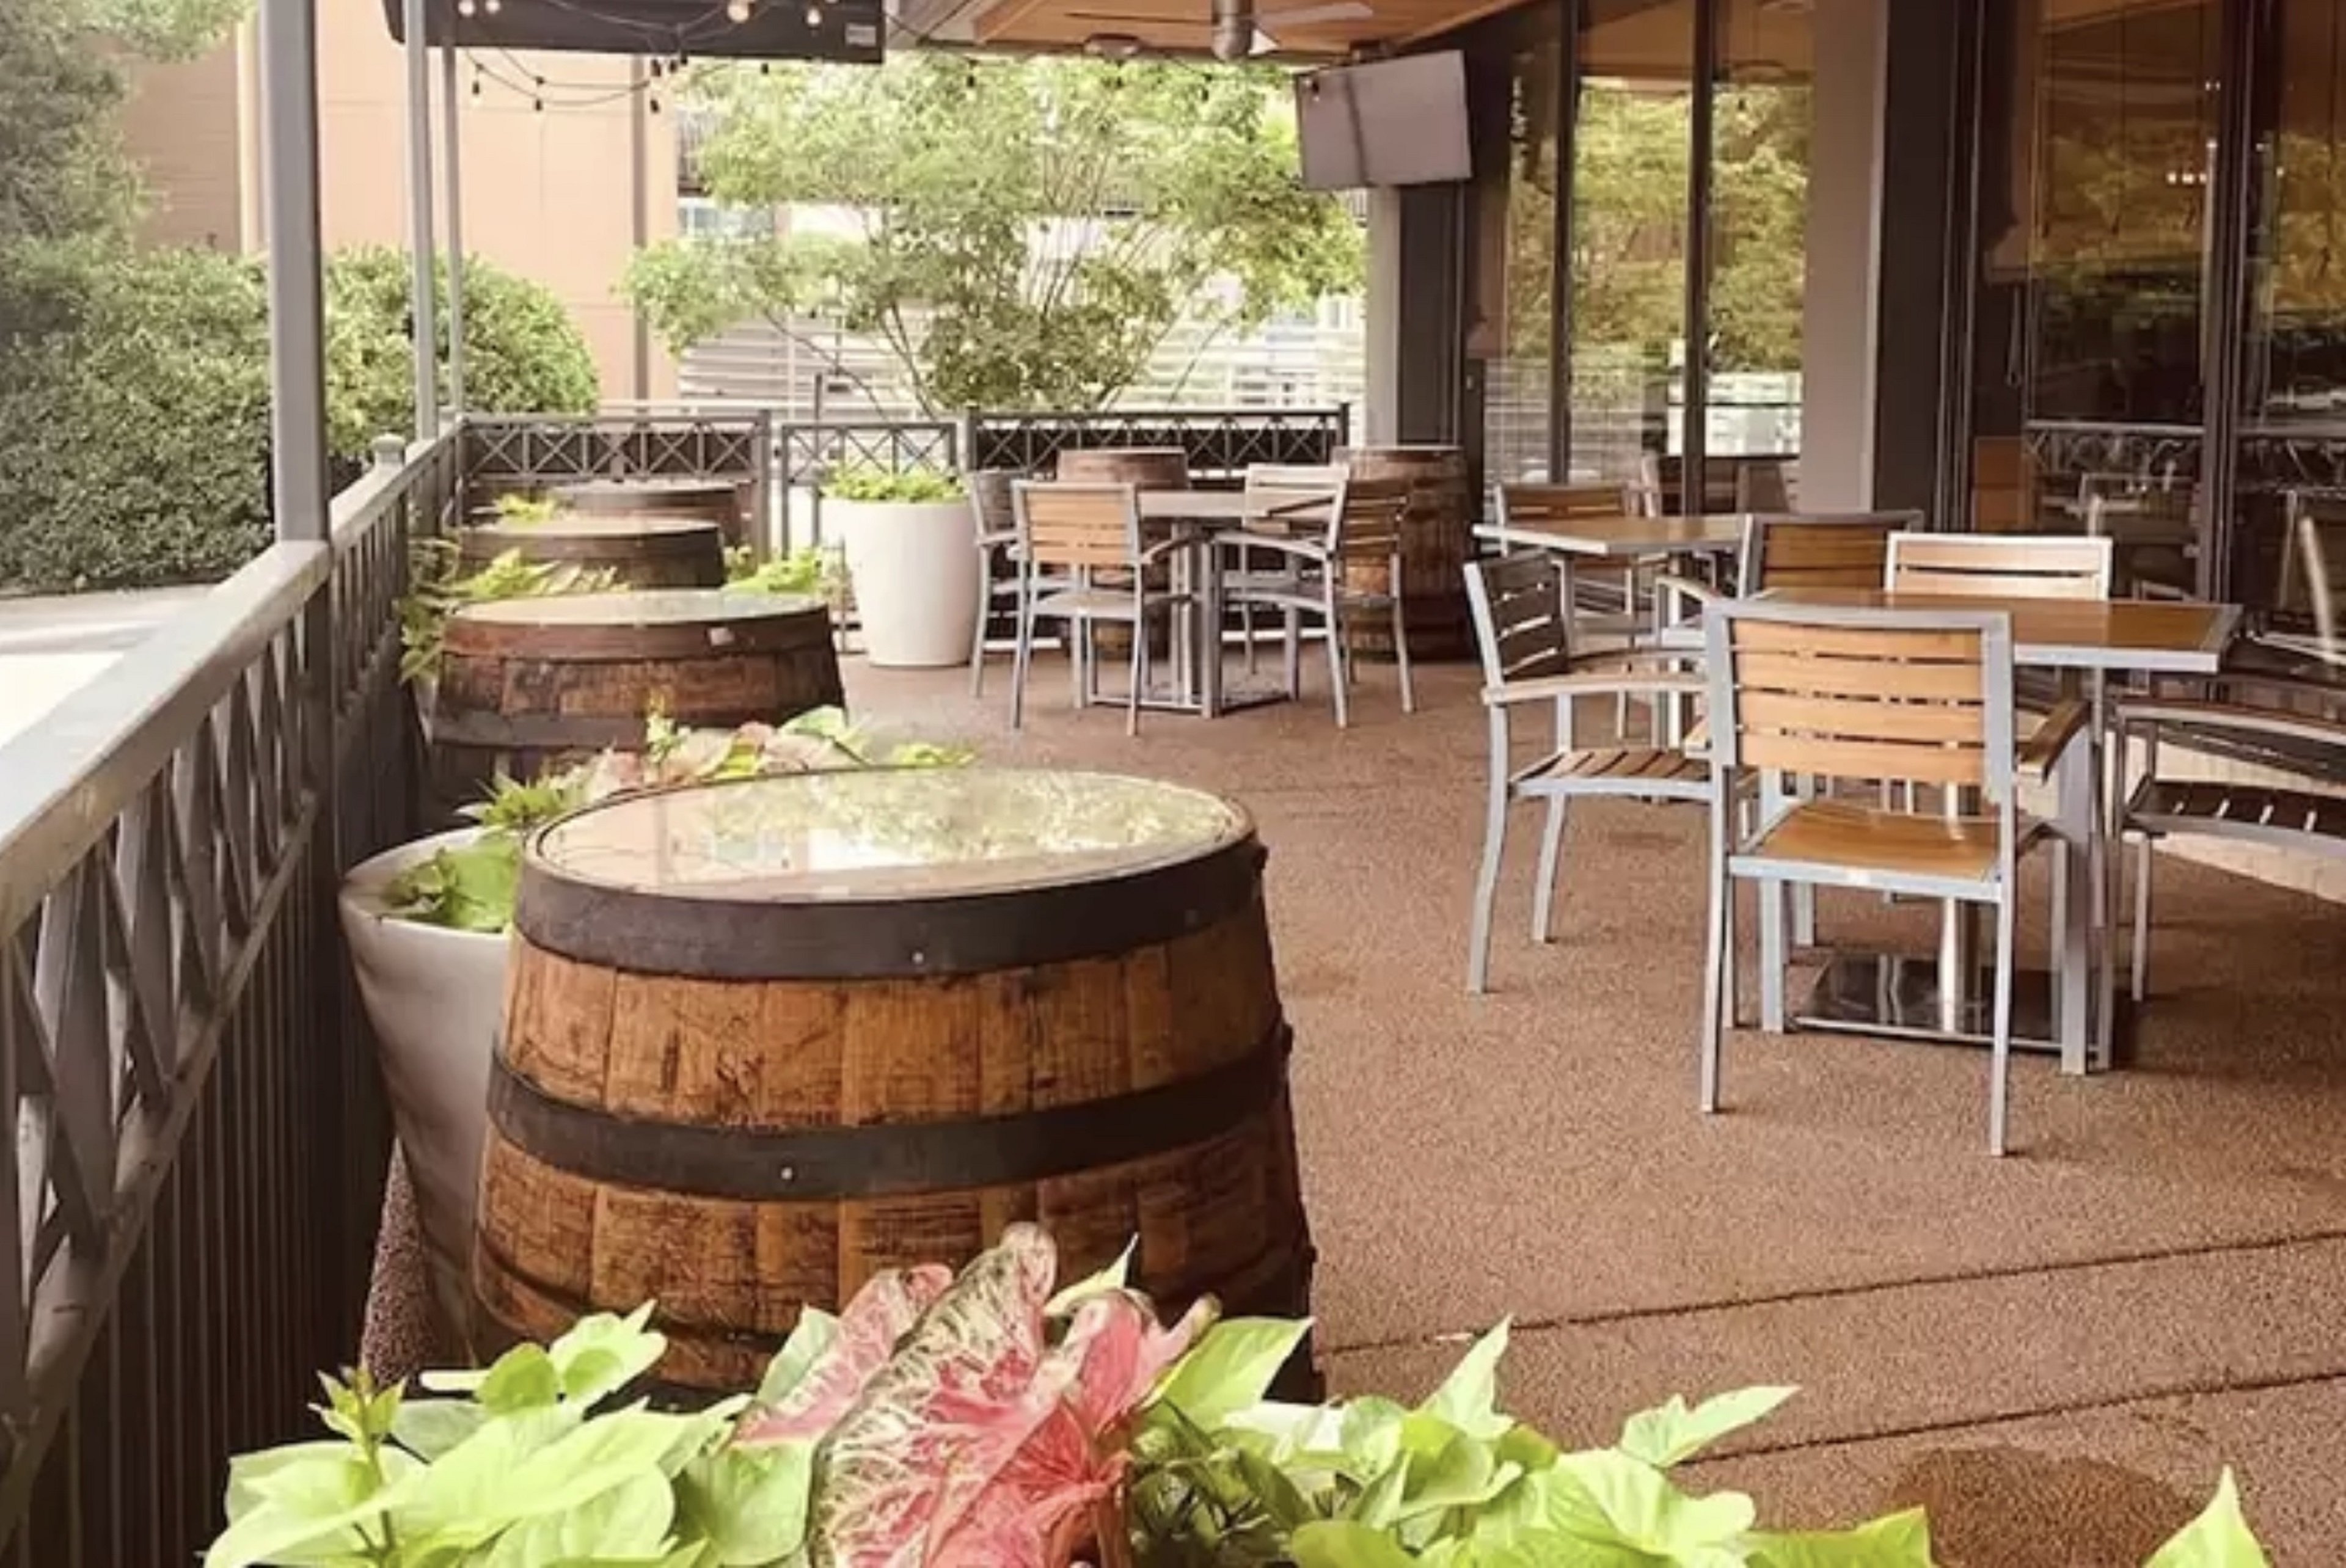 Enjoy outdoor dining at our Commodore Grille